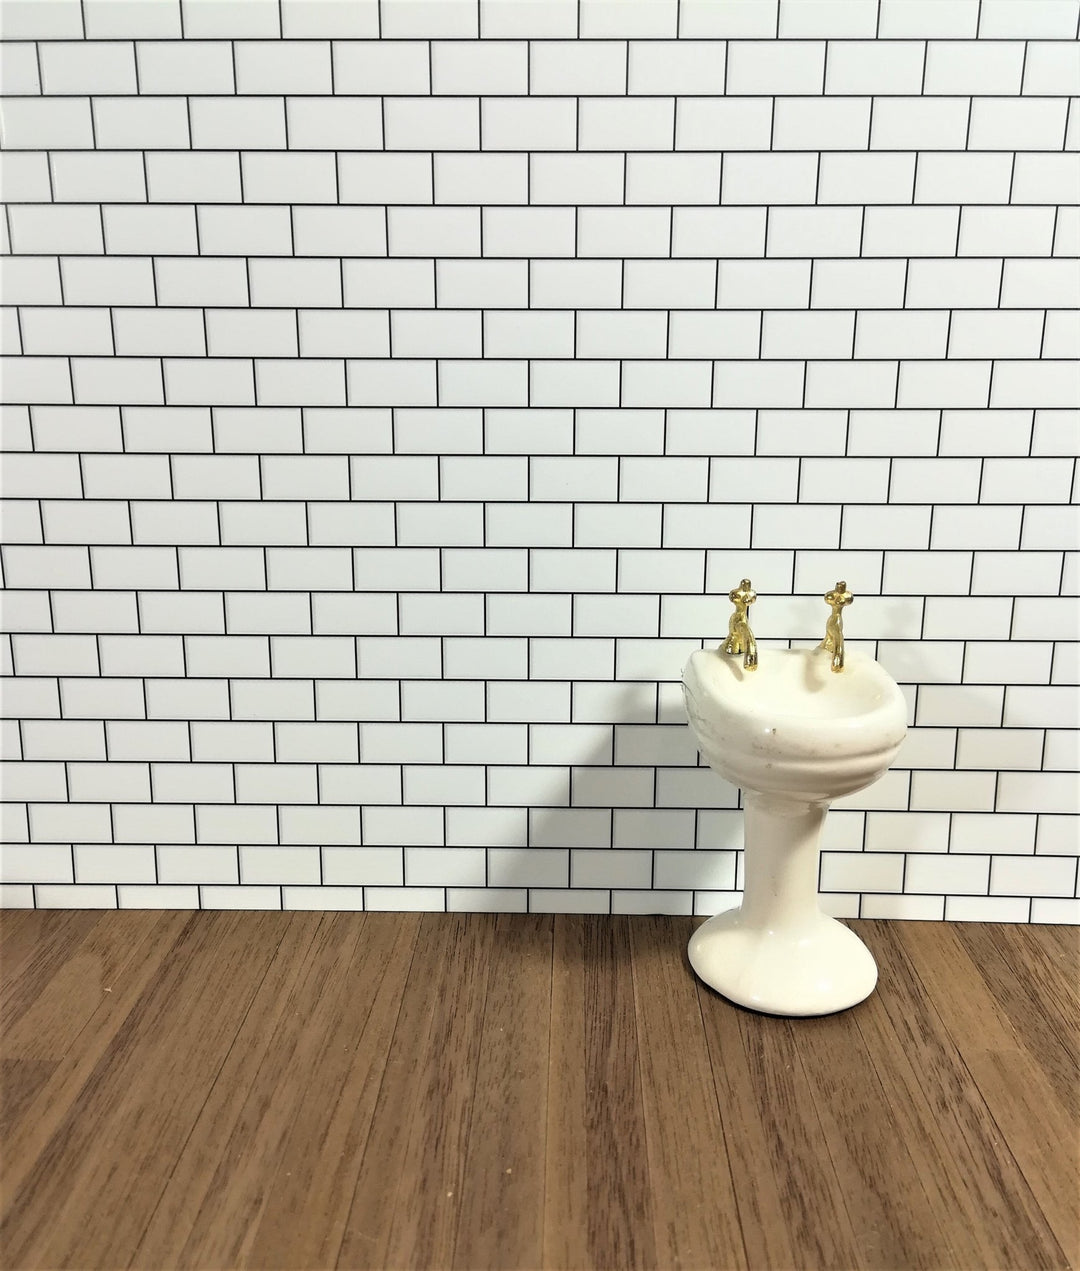 Dollhouse Miniature Subway Metro Wall Tile White Embossed Glossy Paper 1:12 Scale Dark Grout - Miniature Crush